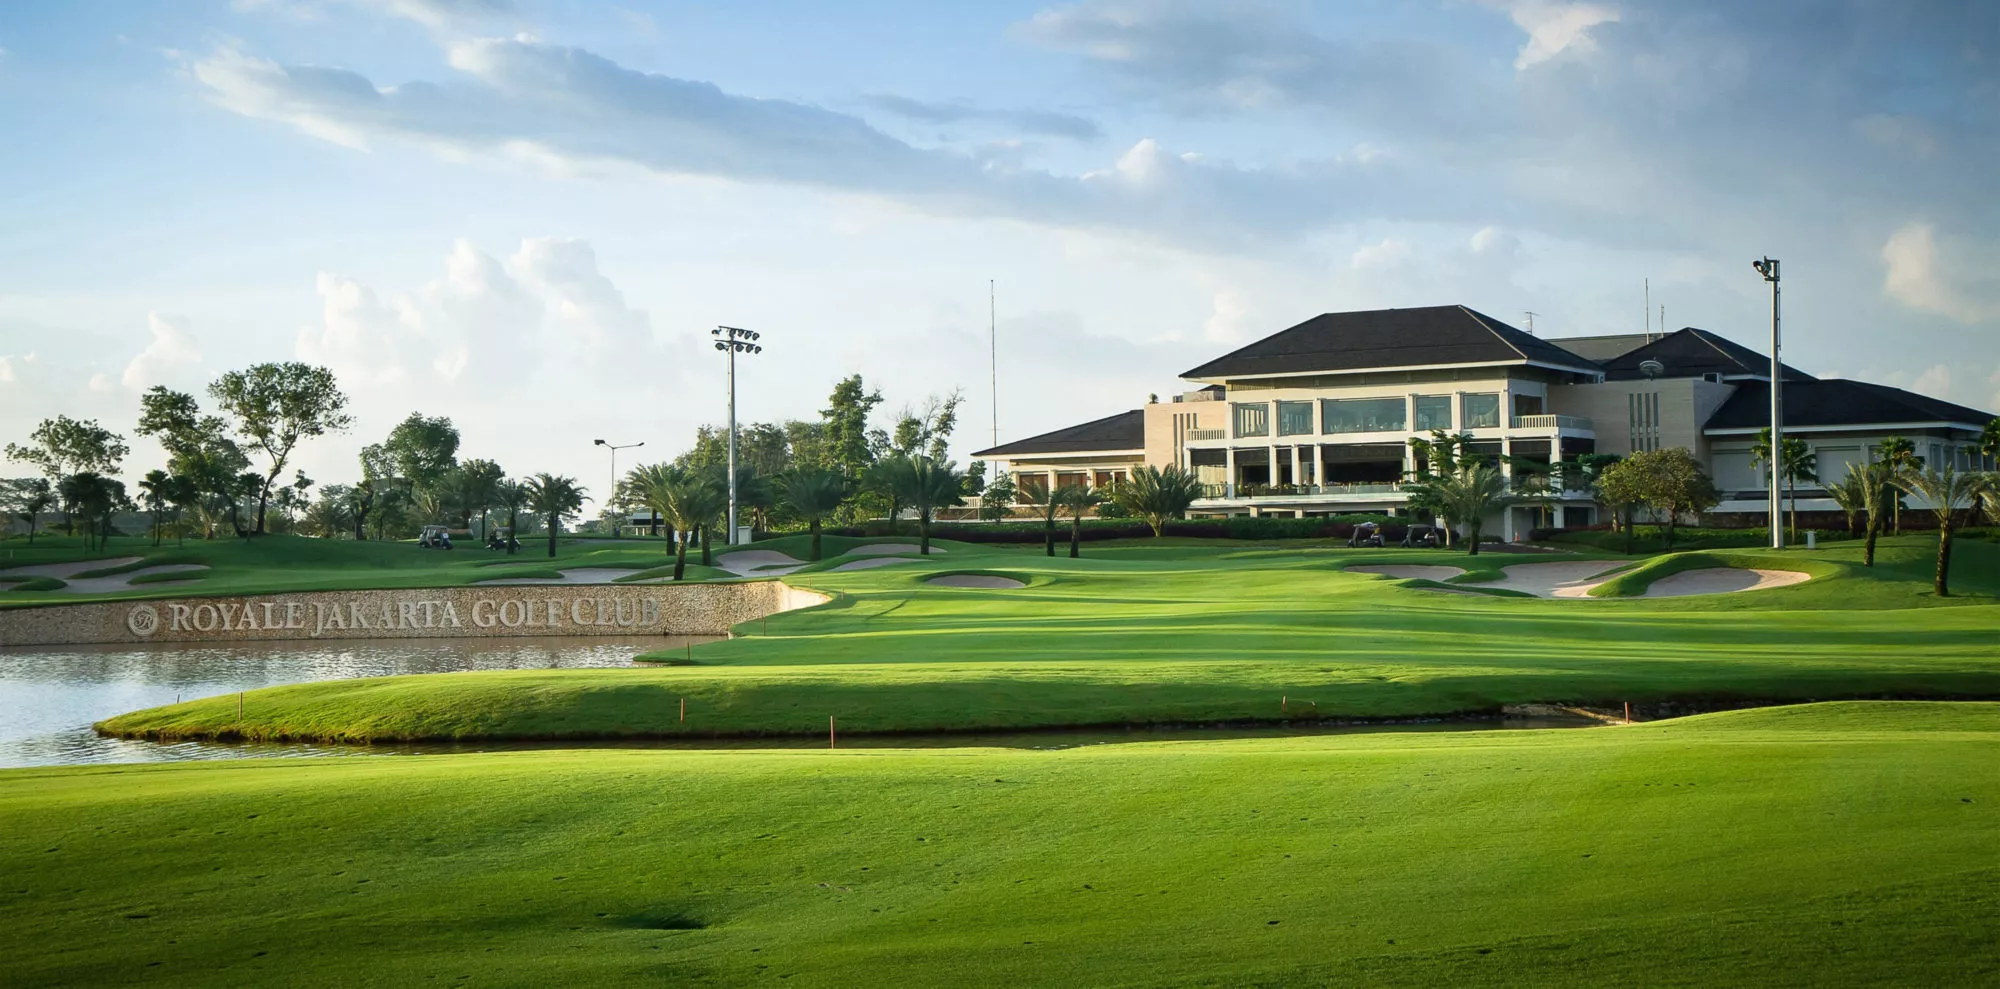 Royale Jakarta Golf Club in Indonesia, Central Asia | Golf - Rated 4.7